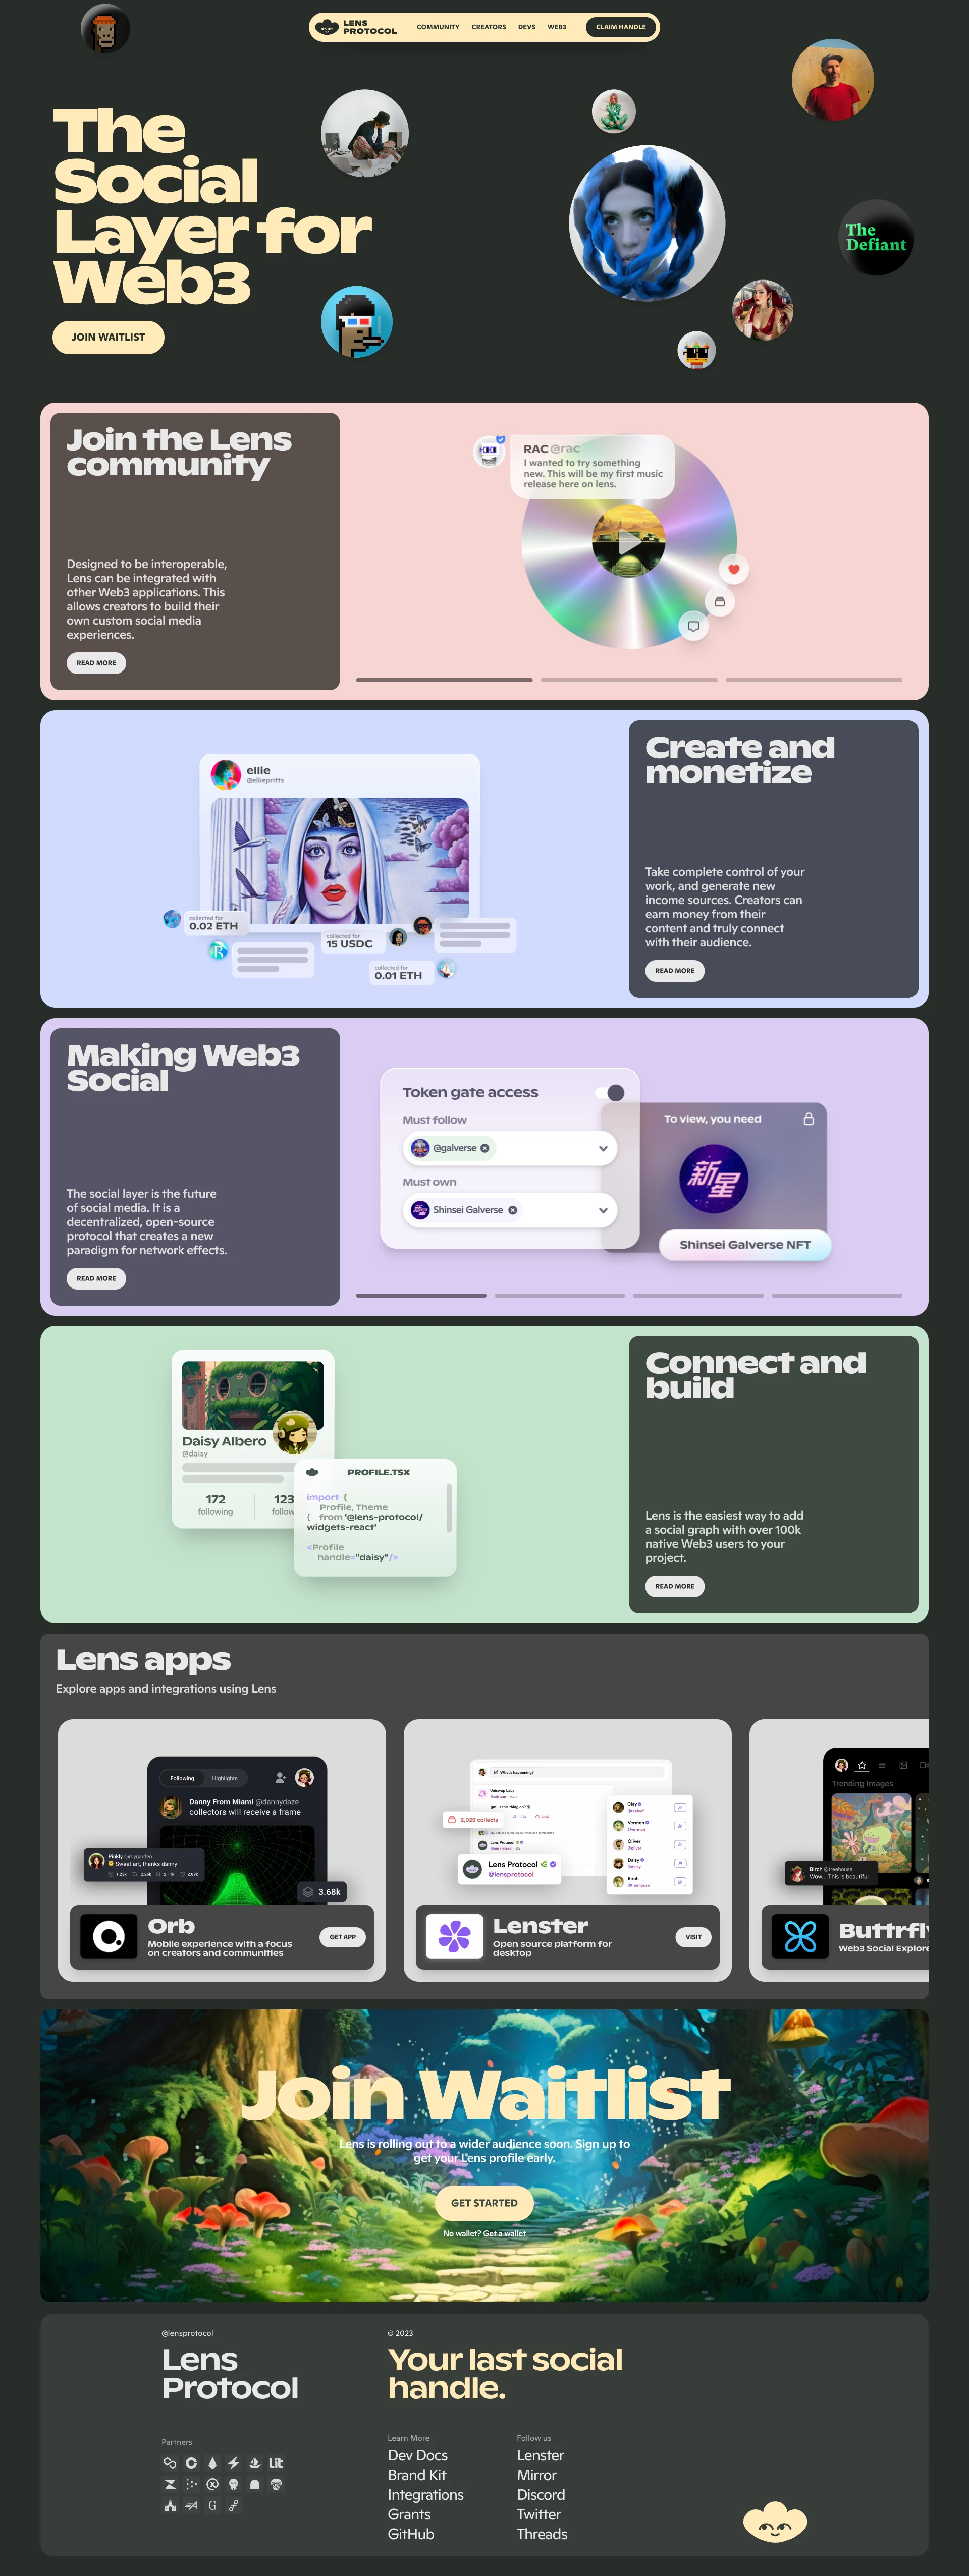 Lens Protocol Landing Page Example: The Social Layer for Web3.